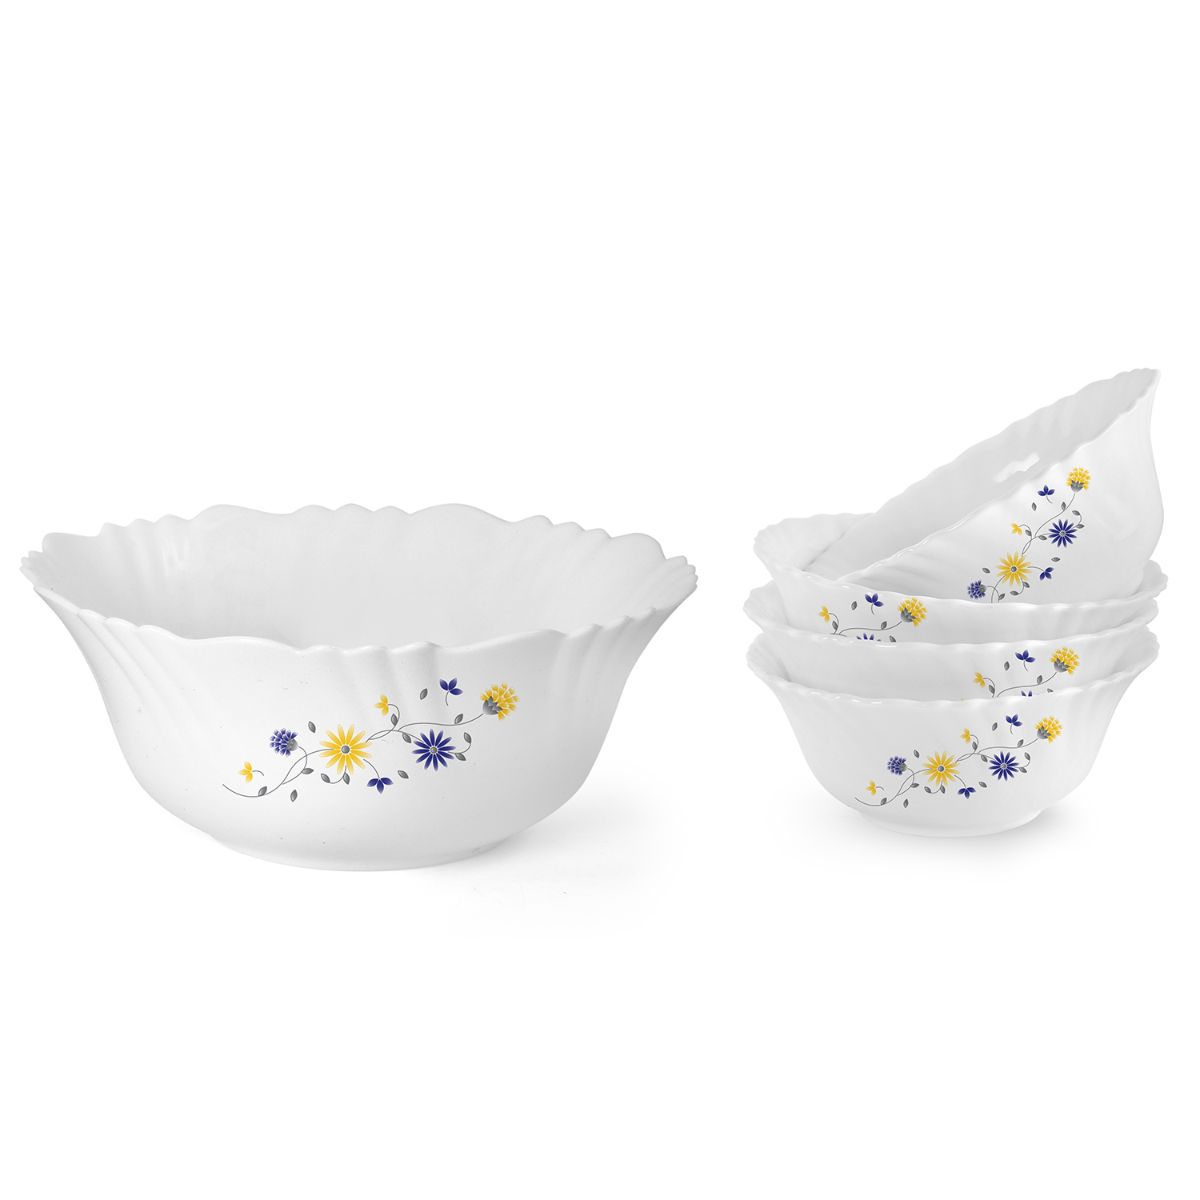 Imperial Series Dessert Set, 5 Pieces Blooming Daisy / 5 Pieces